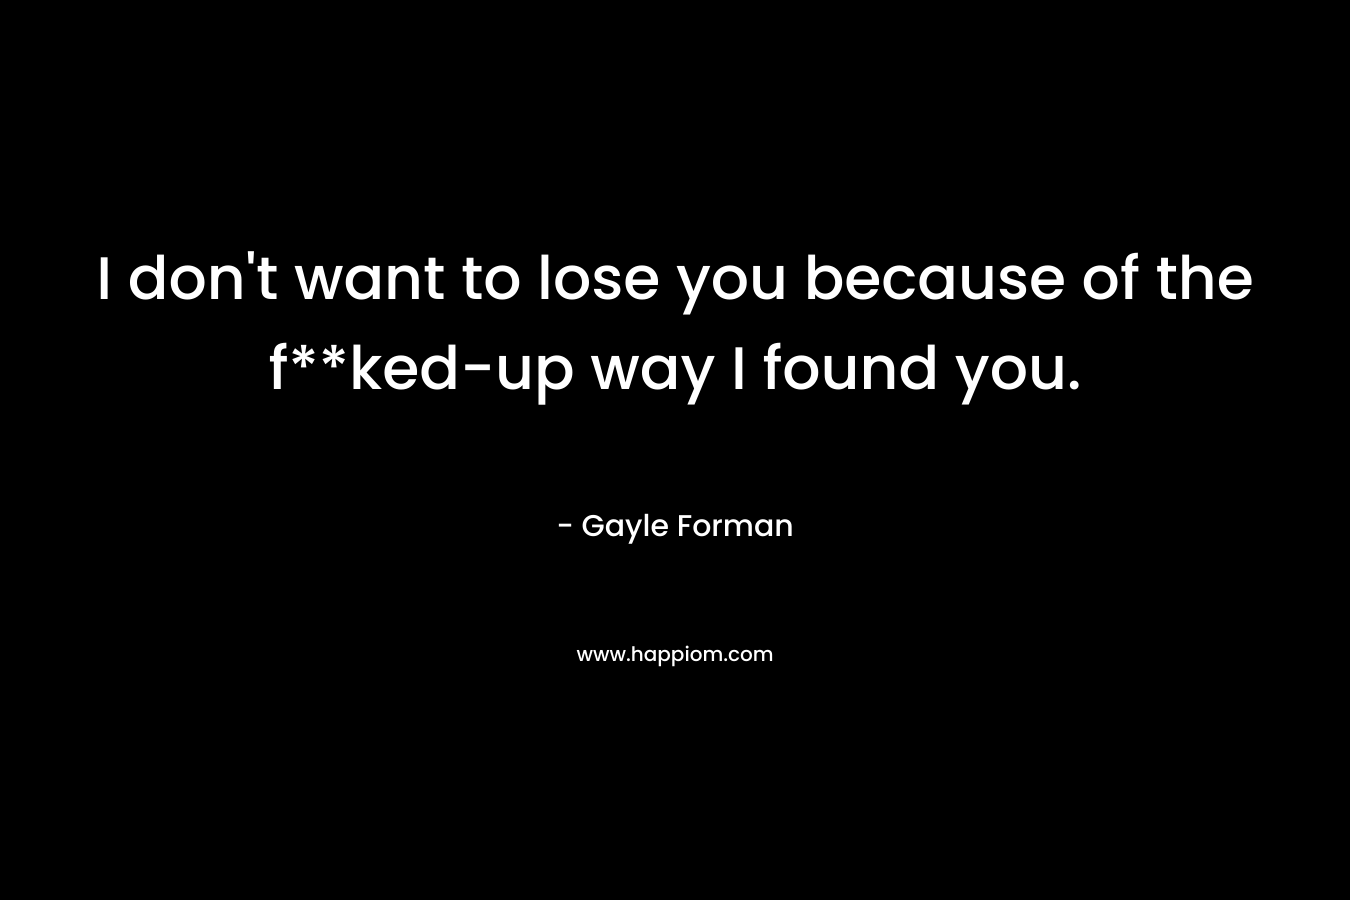 I don't want to lose you because of the f**ked-up way I found you.